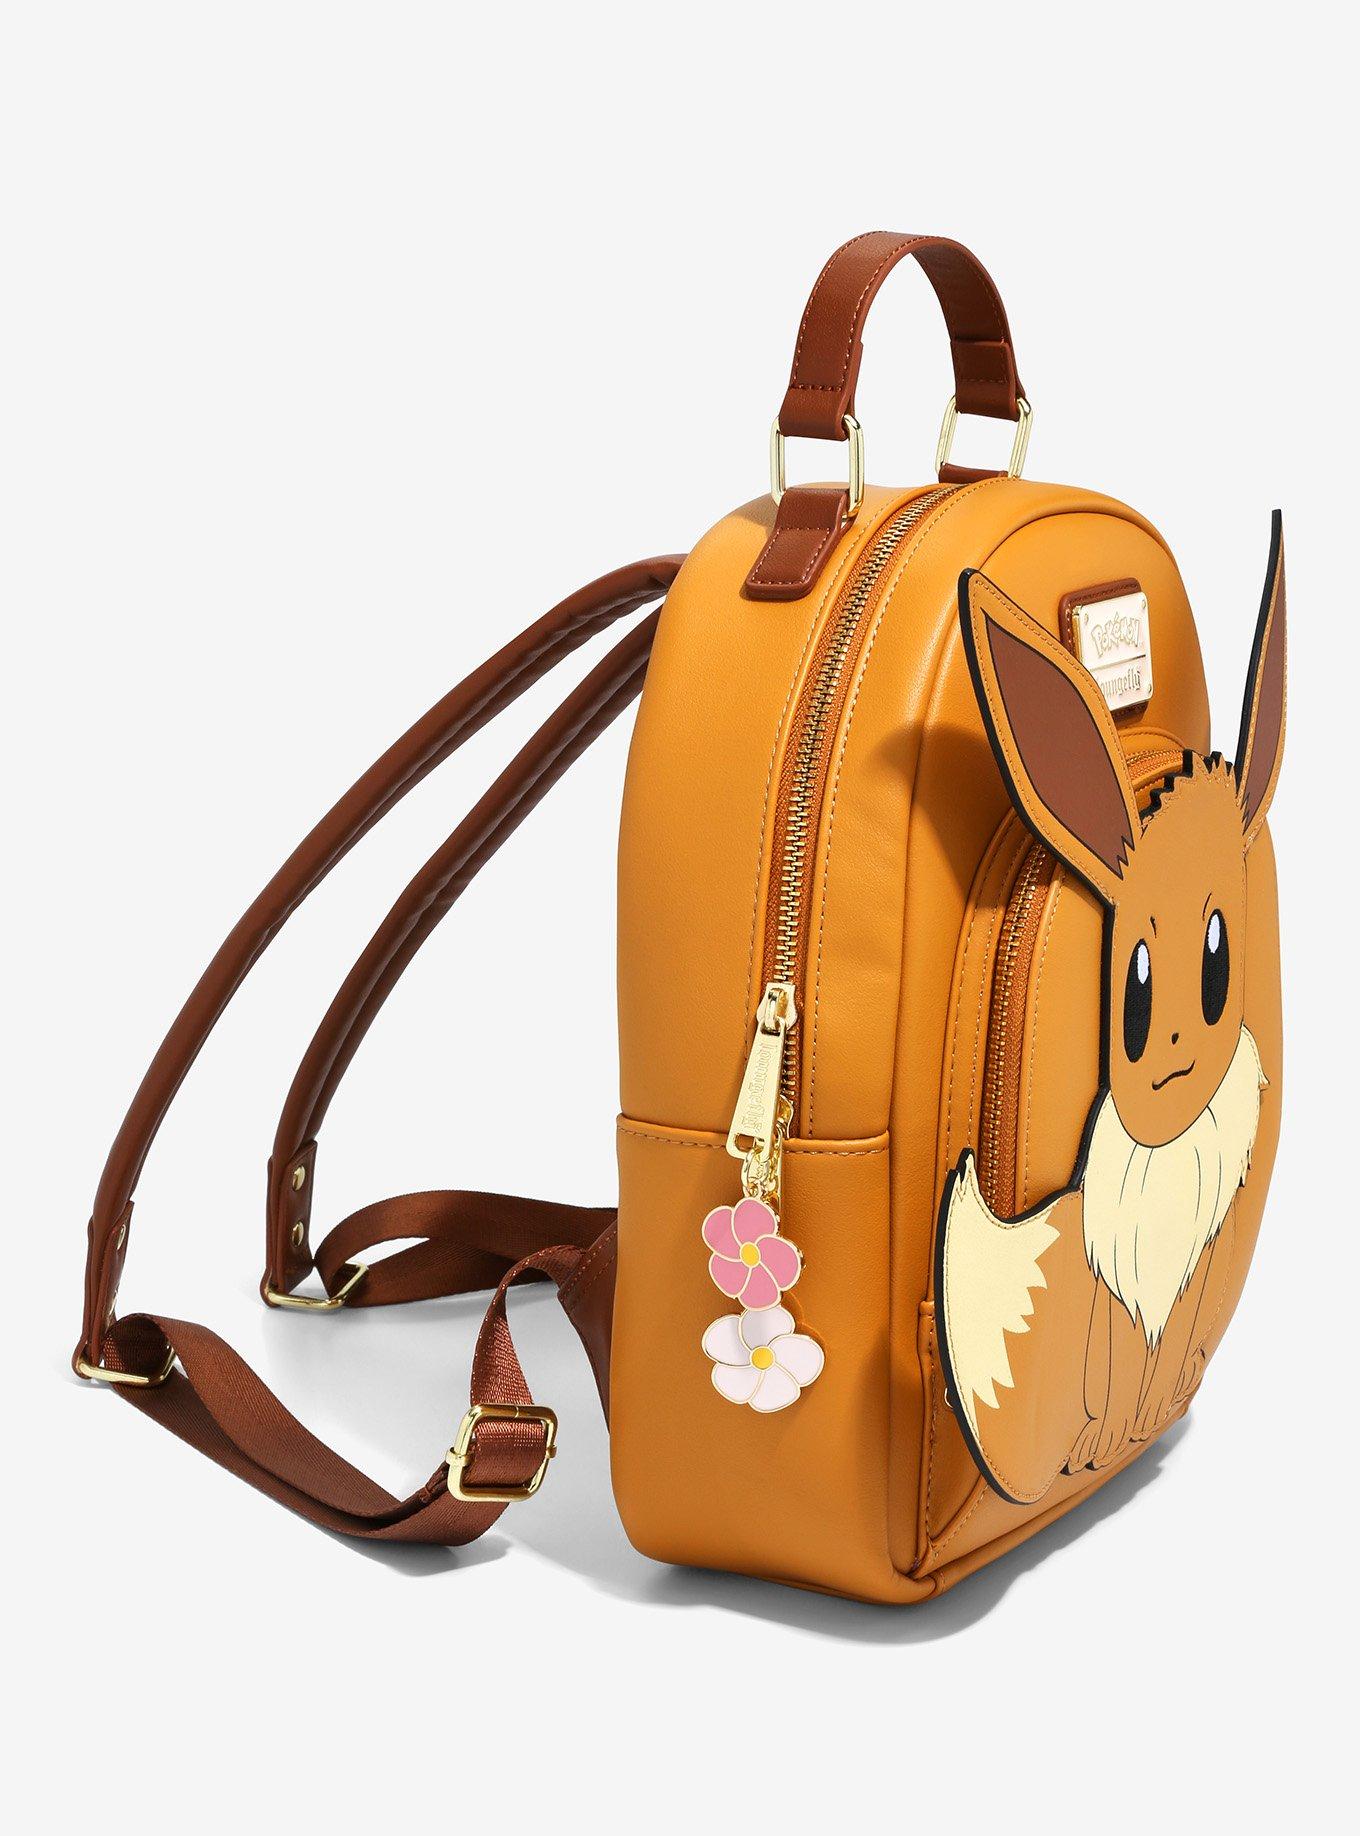 Loungefly Pokémon Eevee & Piplup Small Zip Wallet - BoxLunch Exclusive